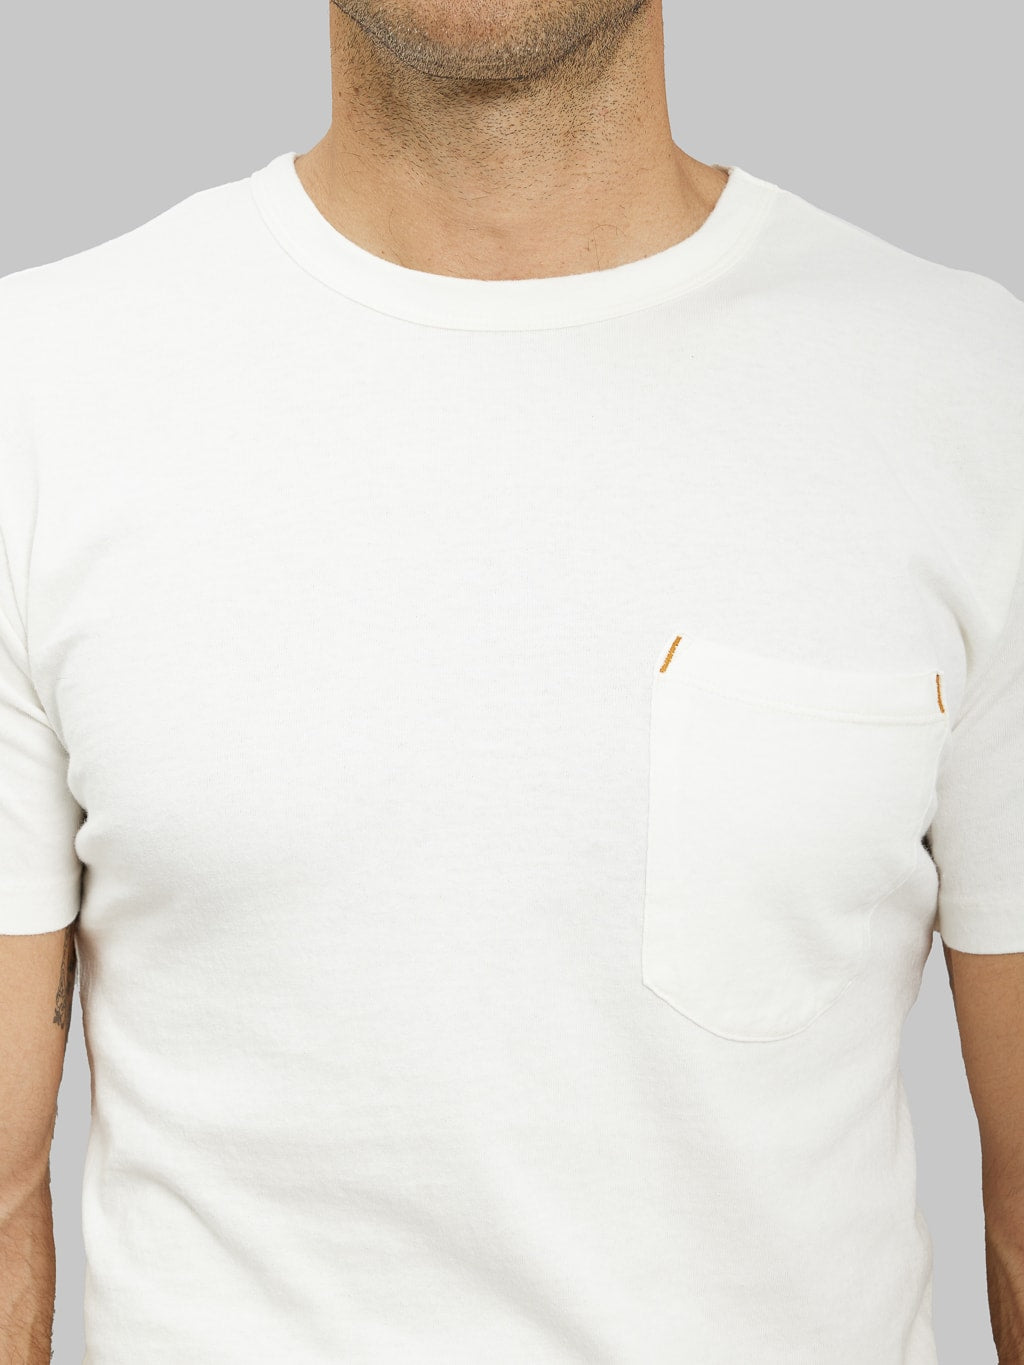 freenote cloth 9 ounce pocket t shirt white  chest details